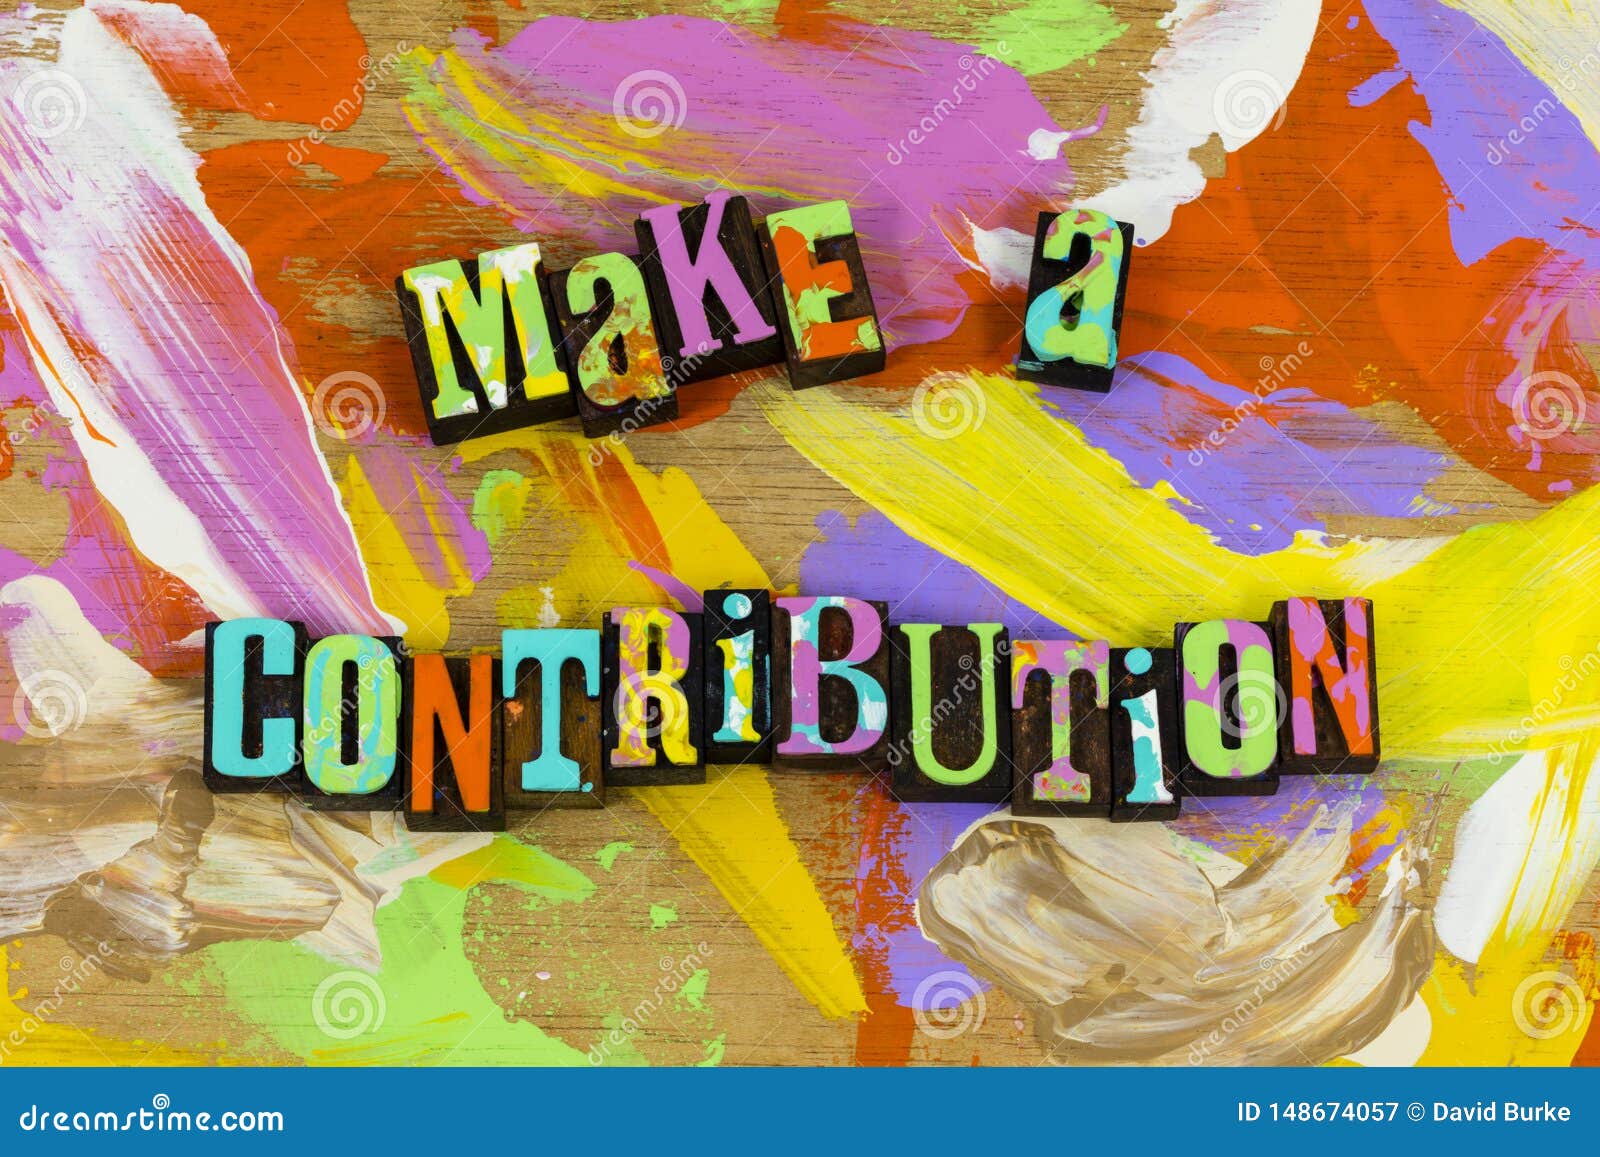 contribution donate charity help kindness give donation nonprofit generosity